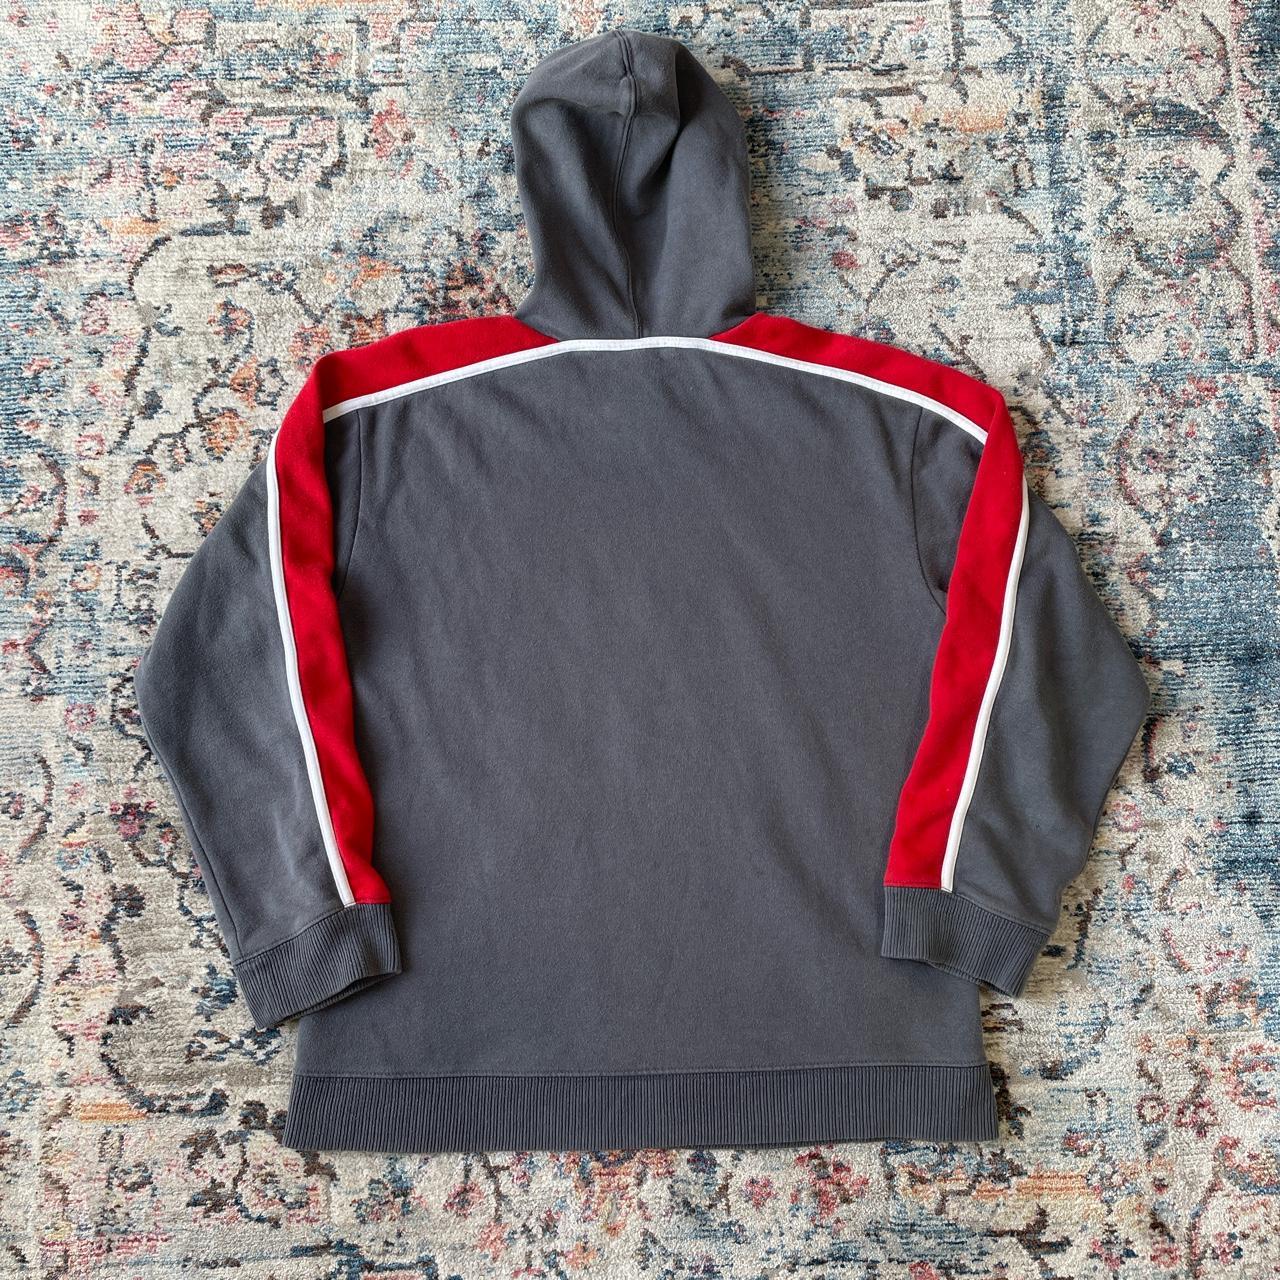 Vintage Nike Grey and Red Spellout Hoodie